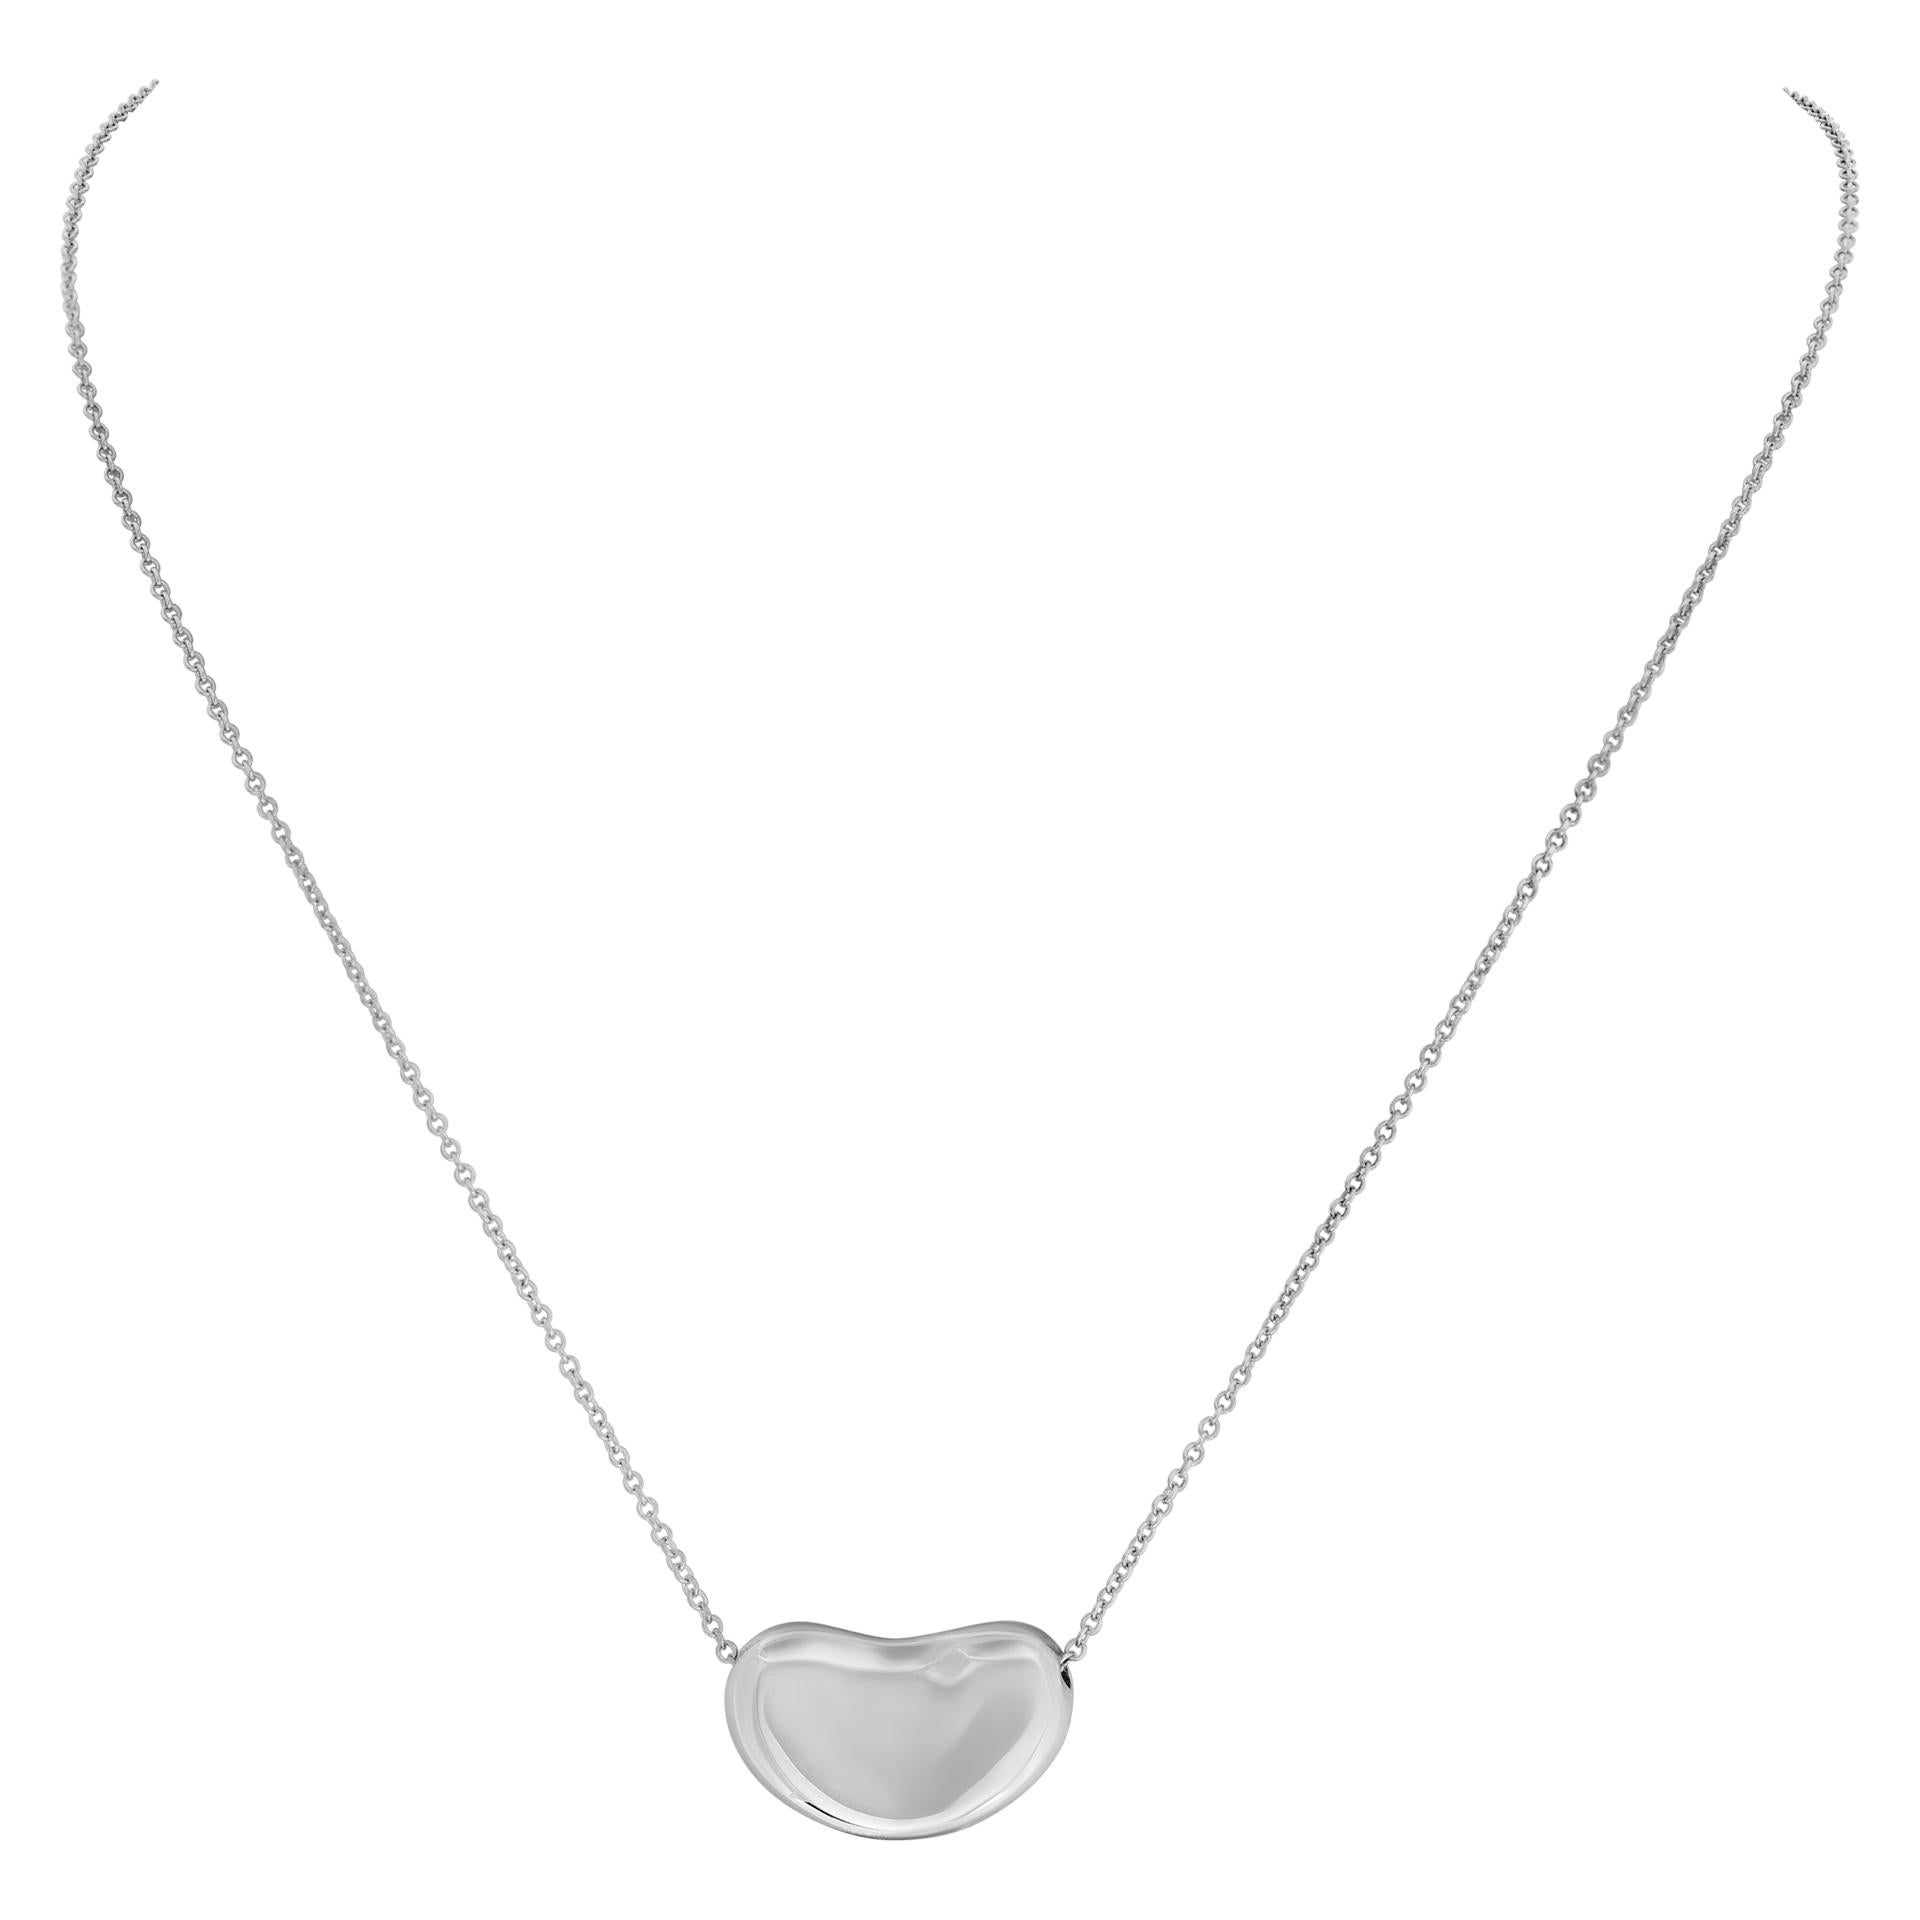 Tiffany & Co. 'Elsa Peretti' bean design pendant necklace in sterling silver with original pouch. Length 16 inches. Size of the heart 12mm x 19mm.
